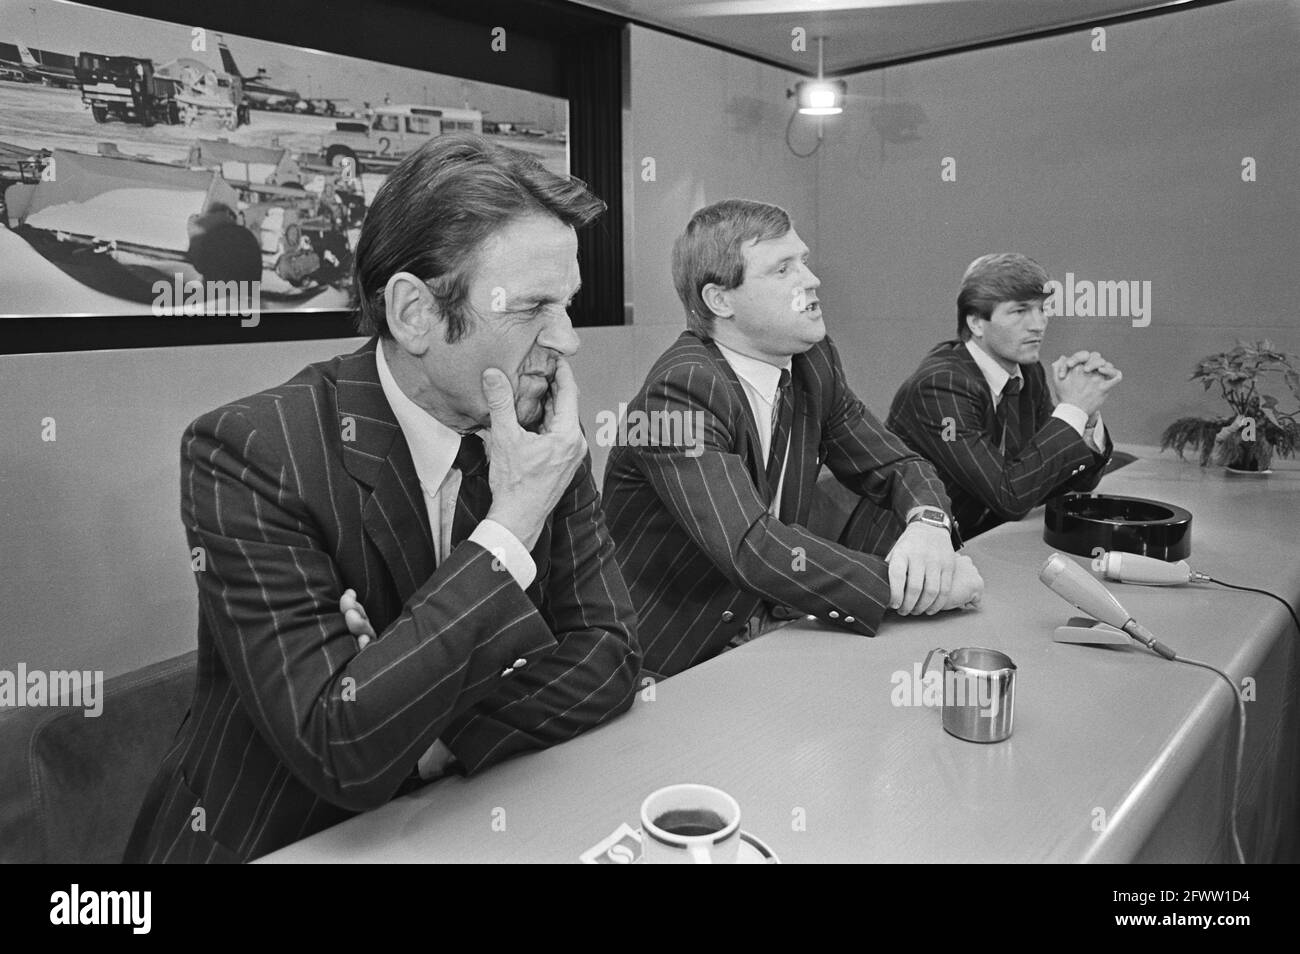 At Schiphol Airport this morning the Dutch national team returned mini-wk in Uruguay, from left to right Zwartkruis, Vilé and Peters, January 8, 1981, teams, press conferences, sports, soccer, The Netherlands, 20th century press agency photo, news to remember, documentary, historic photography 1945-1990, visual stories, human history of the Twentieth Century, capturing moments in time Stock Photo